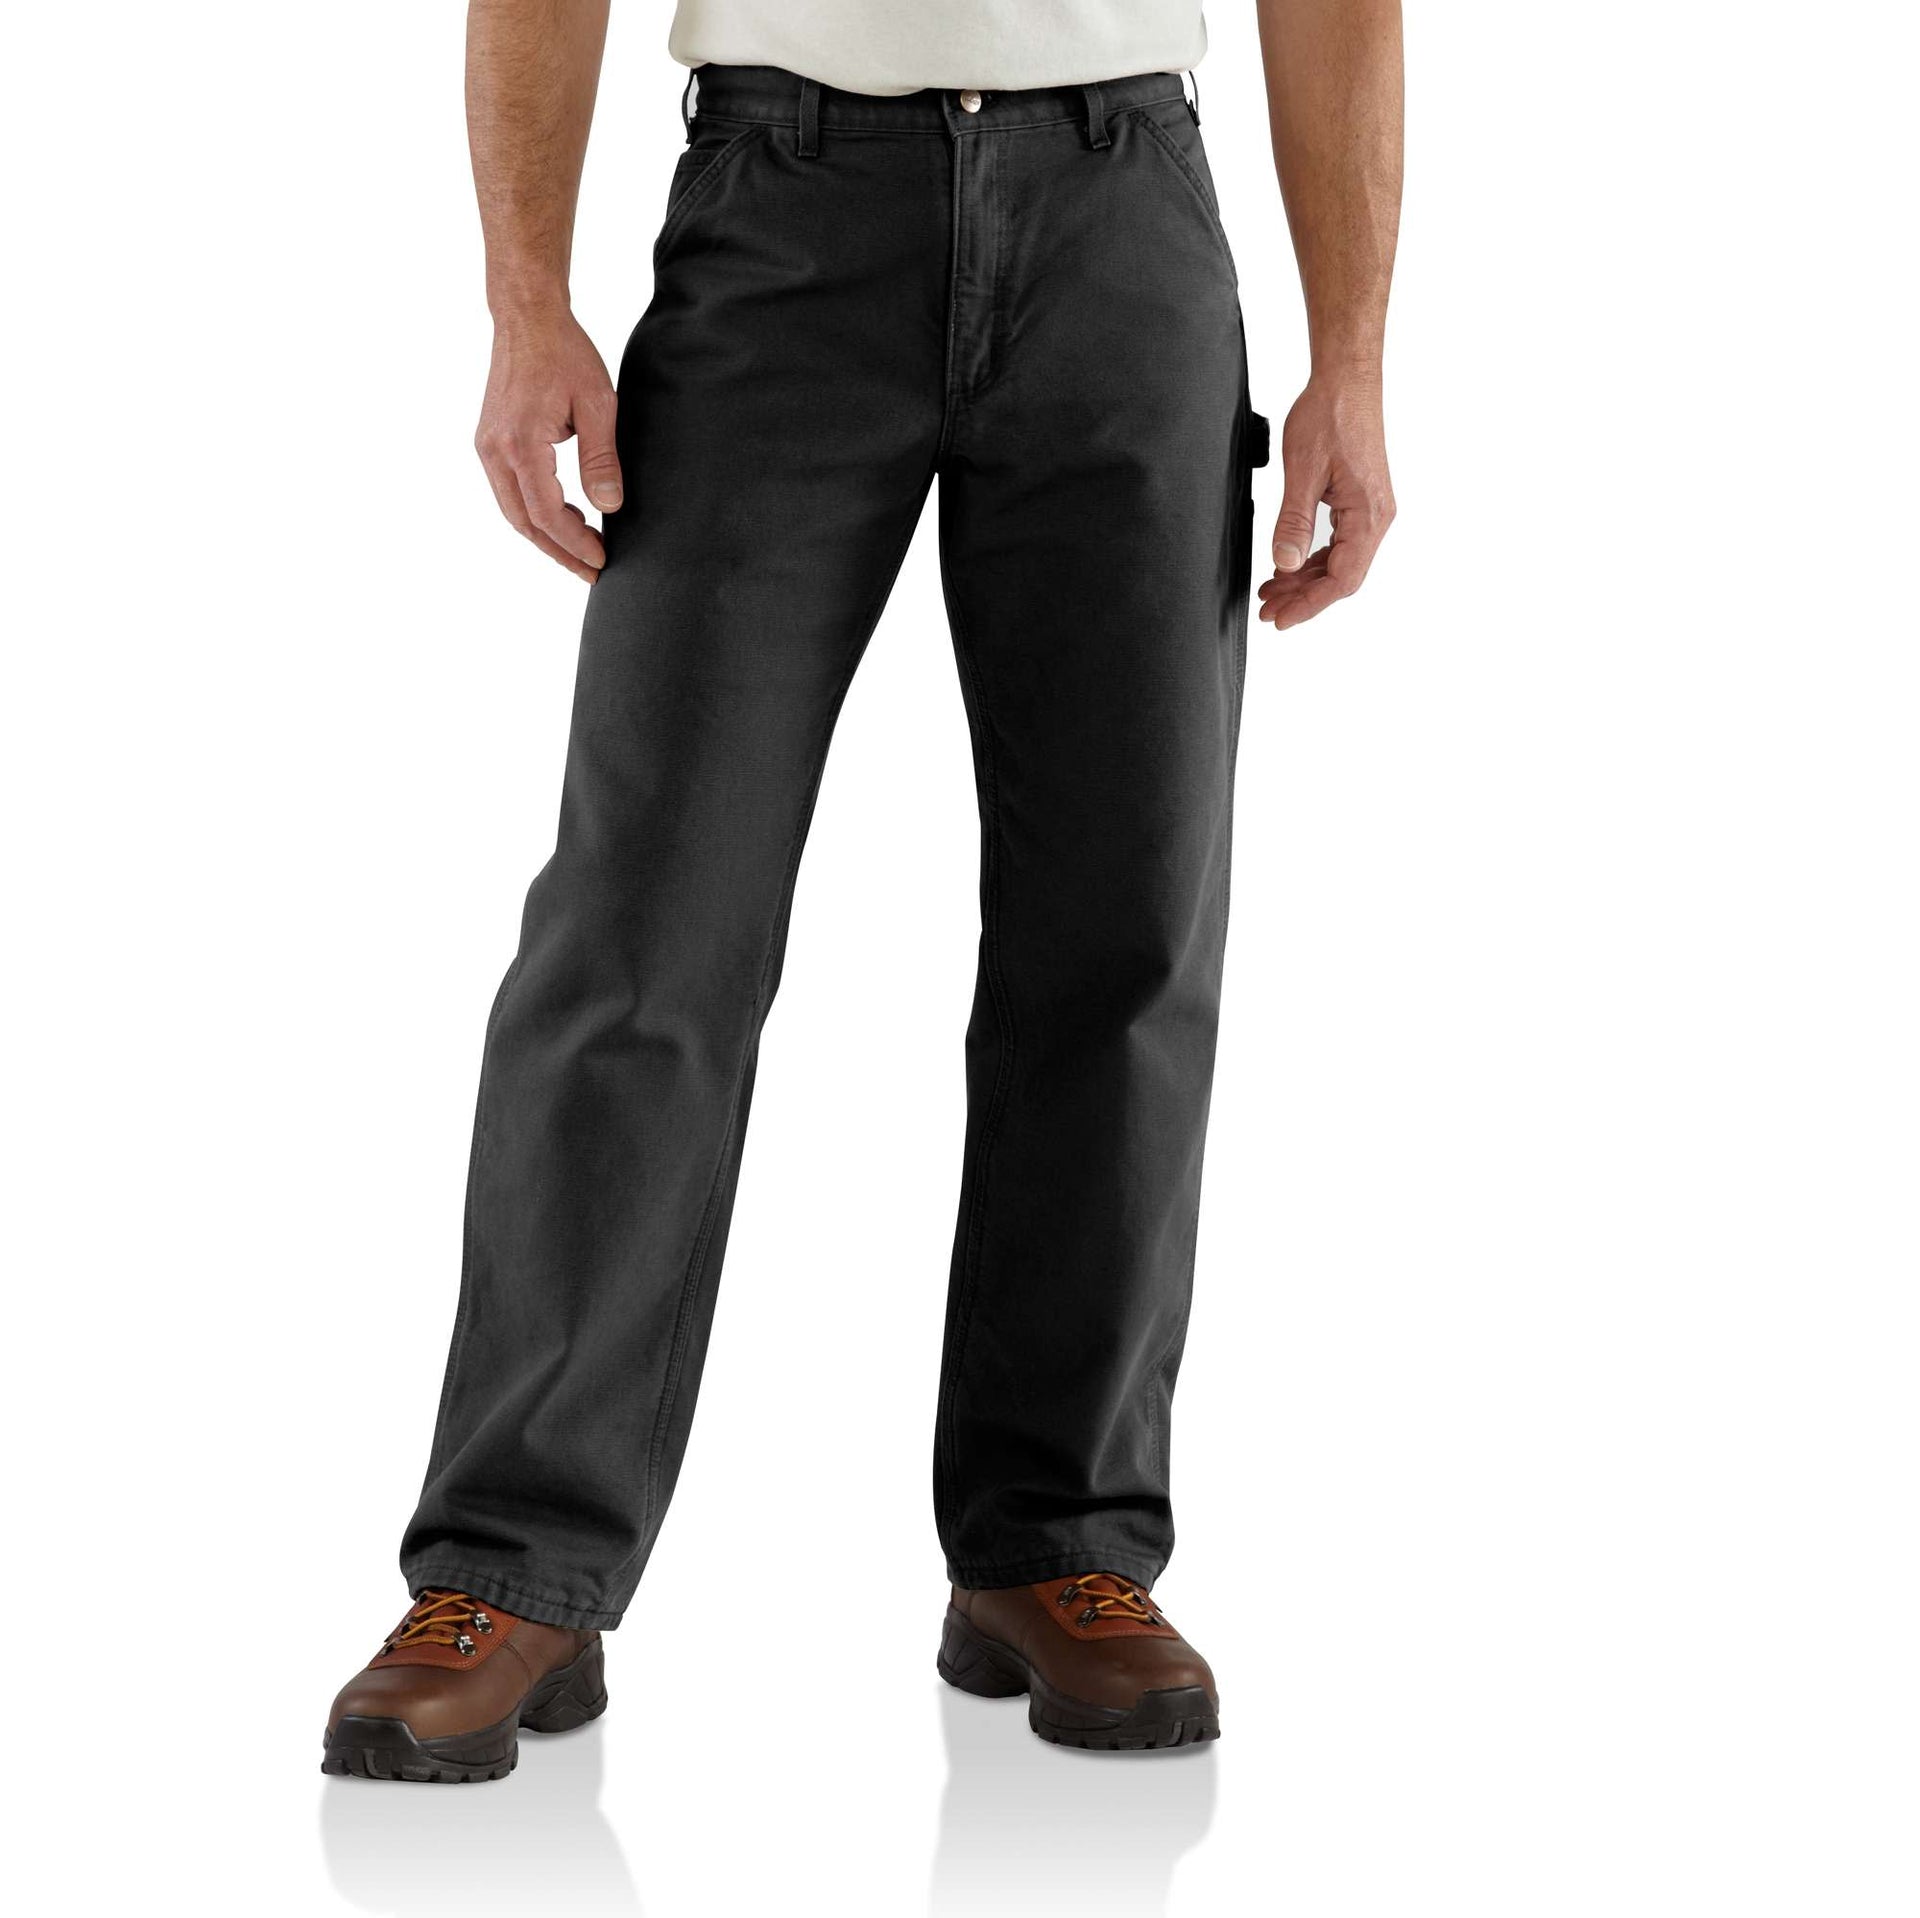 Carhartt Pants: Men's 105471 Blk Black Loose Fit Washed Duck Insulated Pant